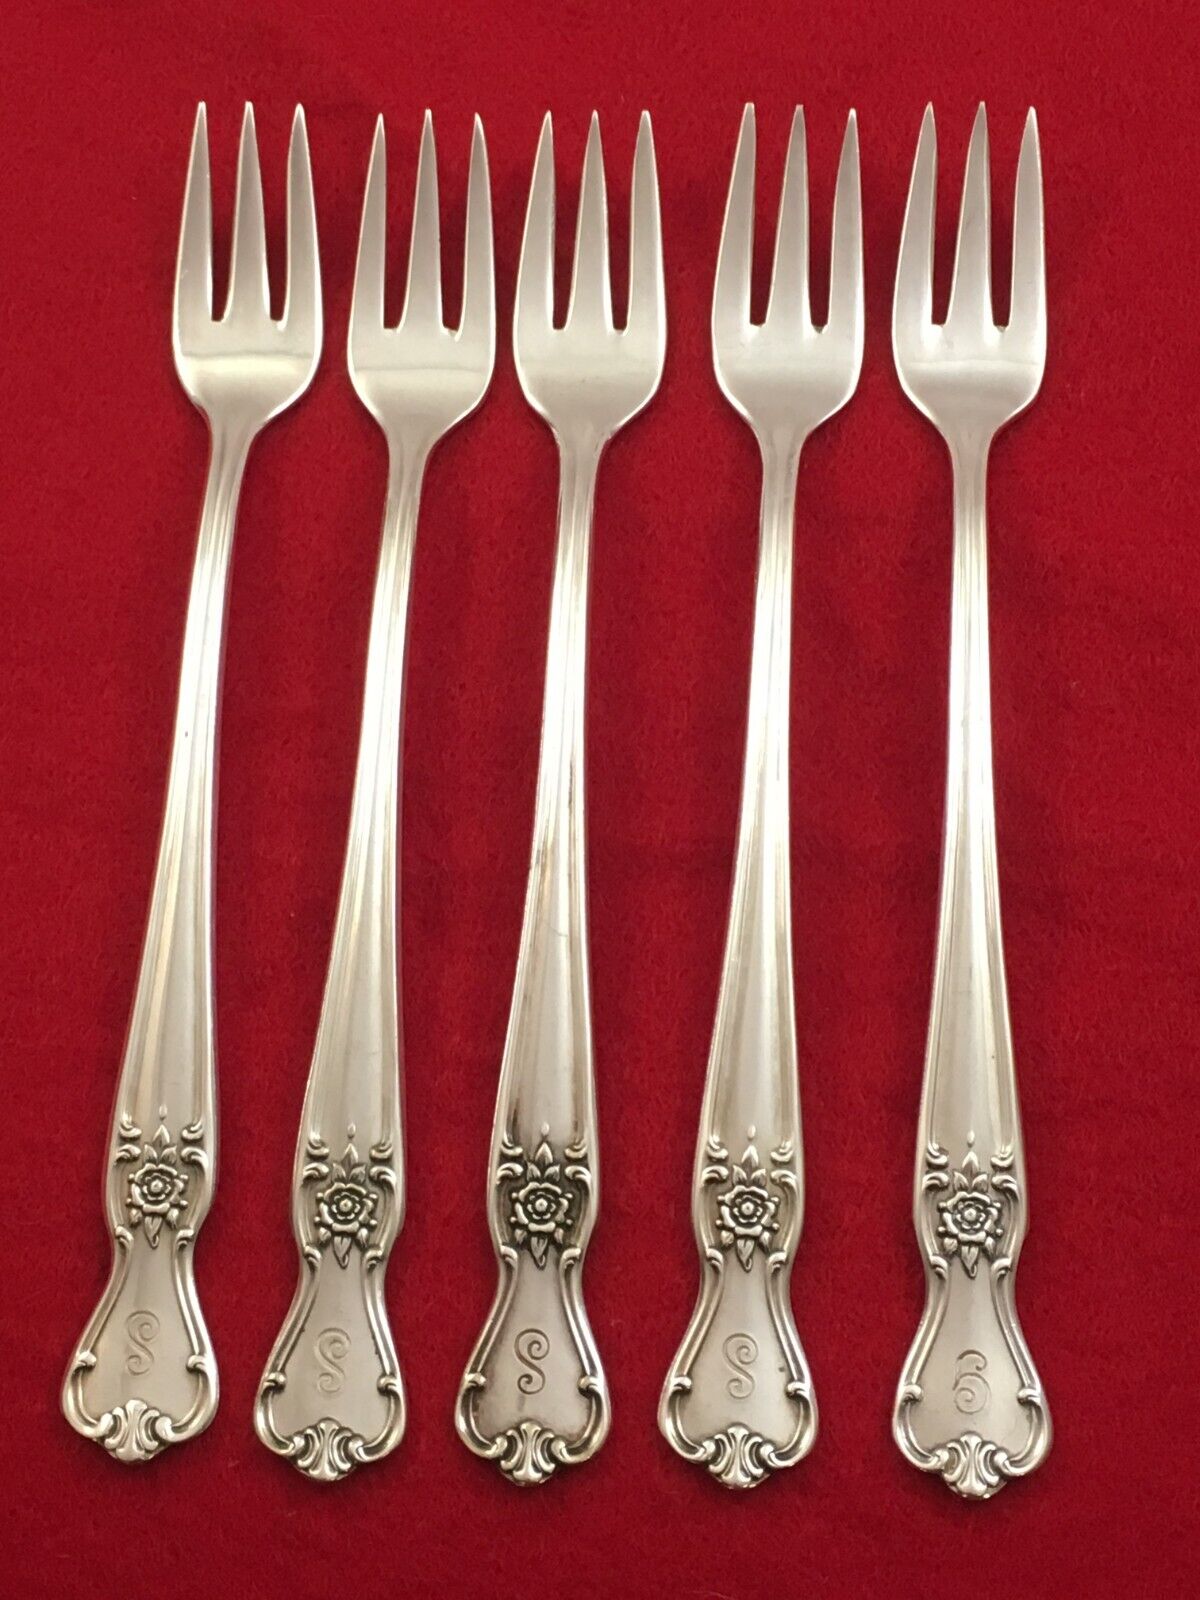 5-Cocktail Seafood Forks International SIGNATURE 1950 Mono S Silverplate